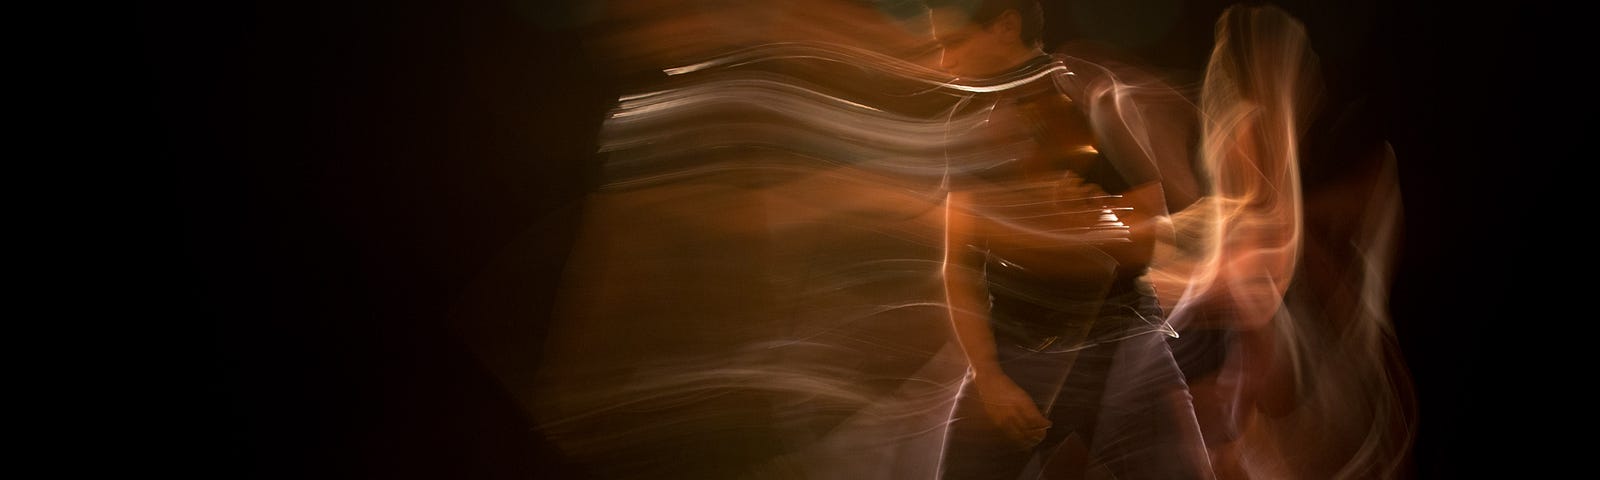 artsy time lapsed photo of a dancer moving across the stage